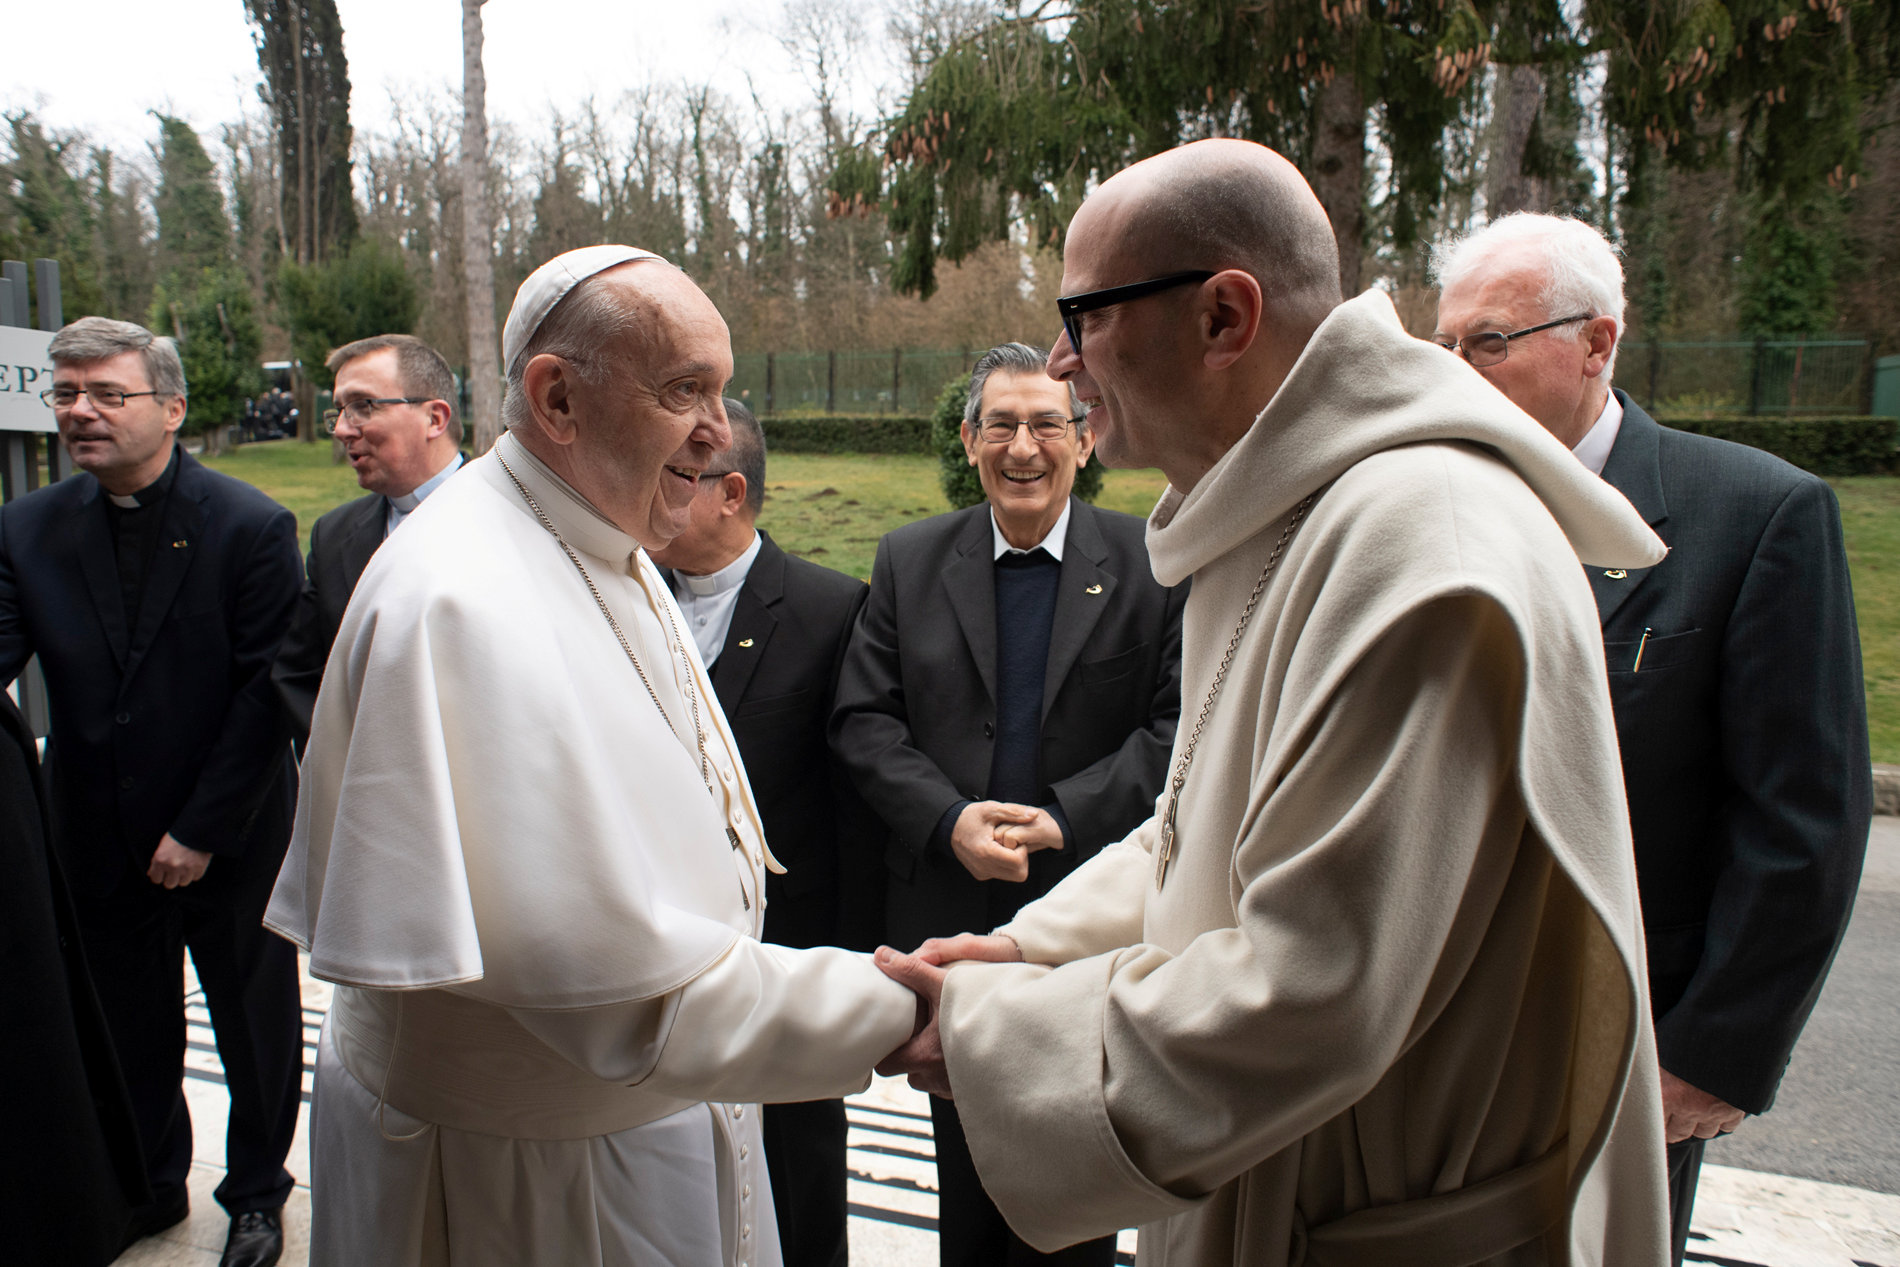 Benedictine abbot leads pope and curial officials in Lenten retreat